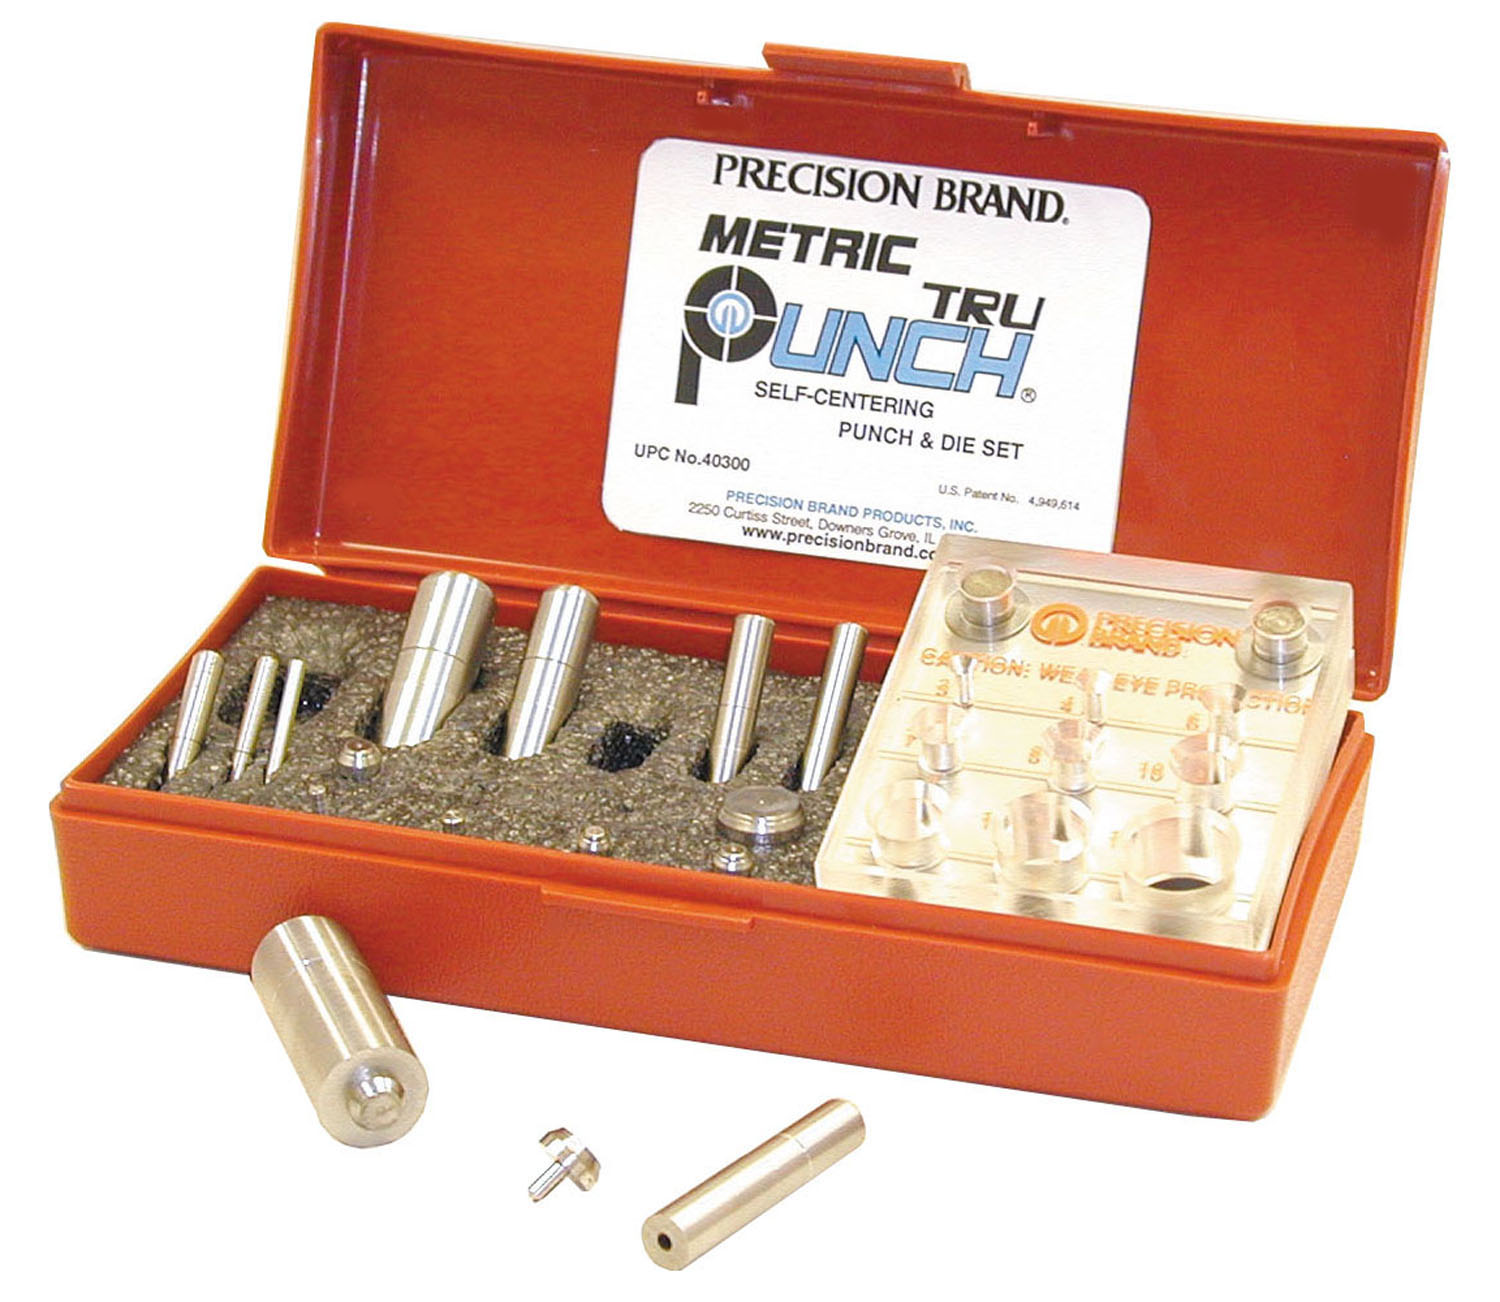 Metric 10” TruPunch® Punch and Die Set - Precision Brand